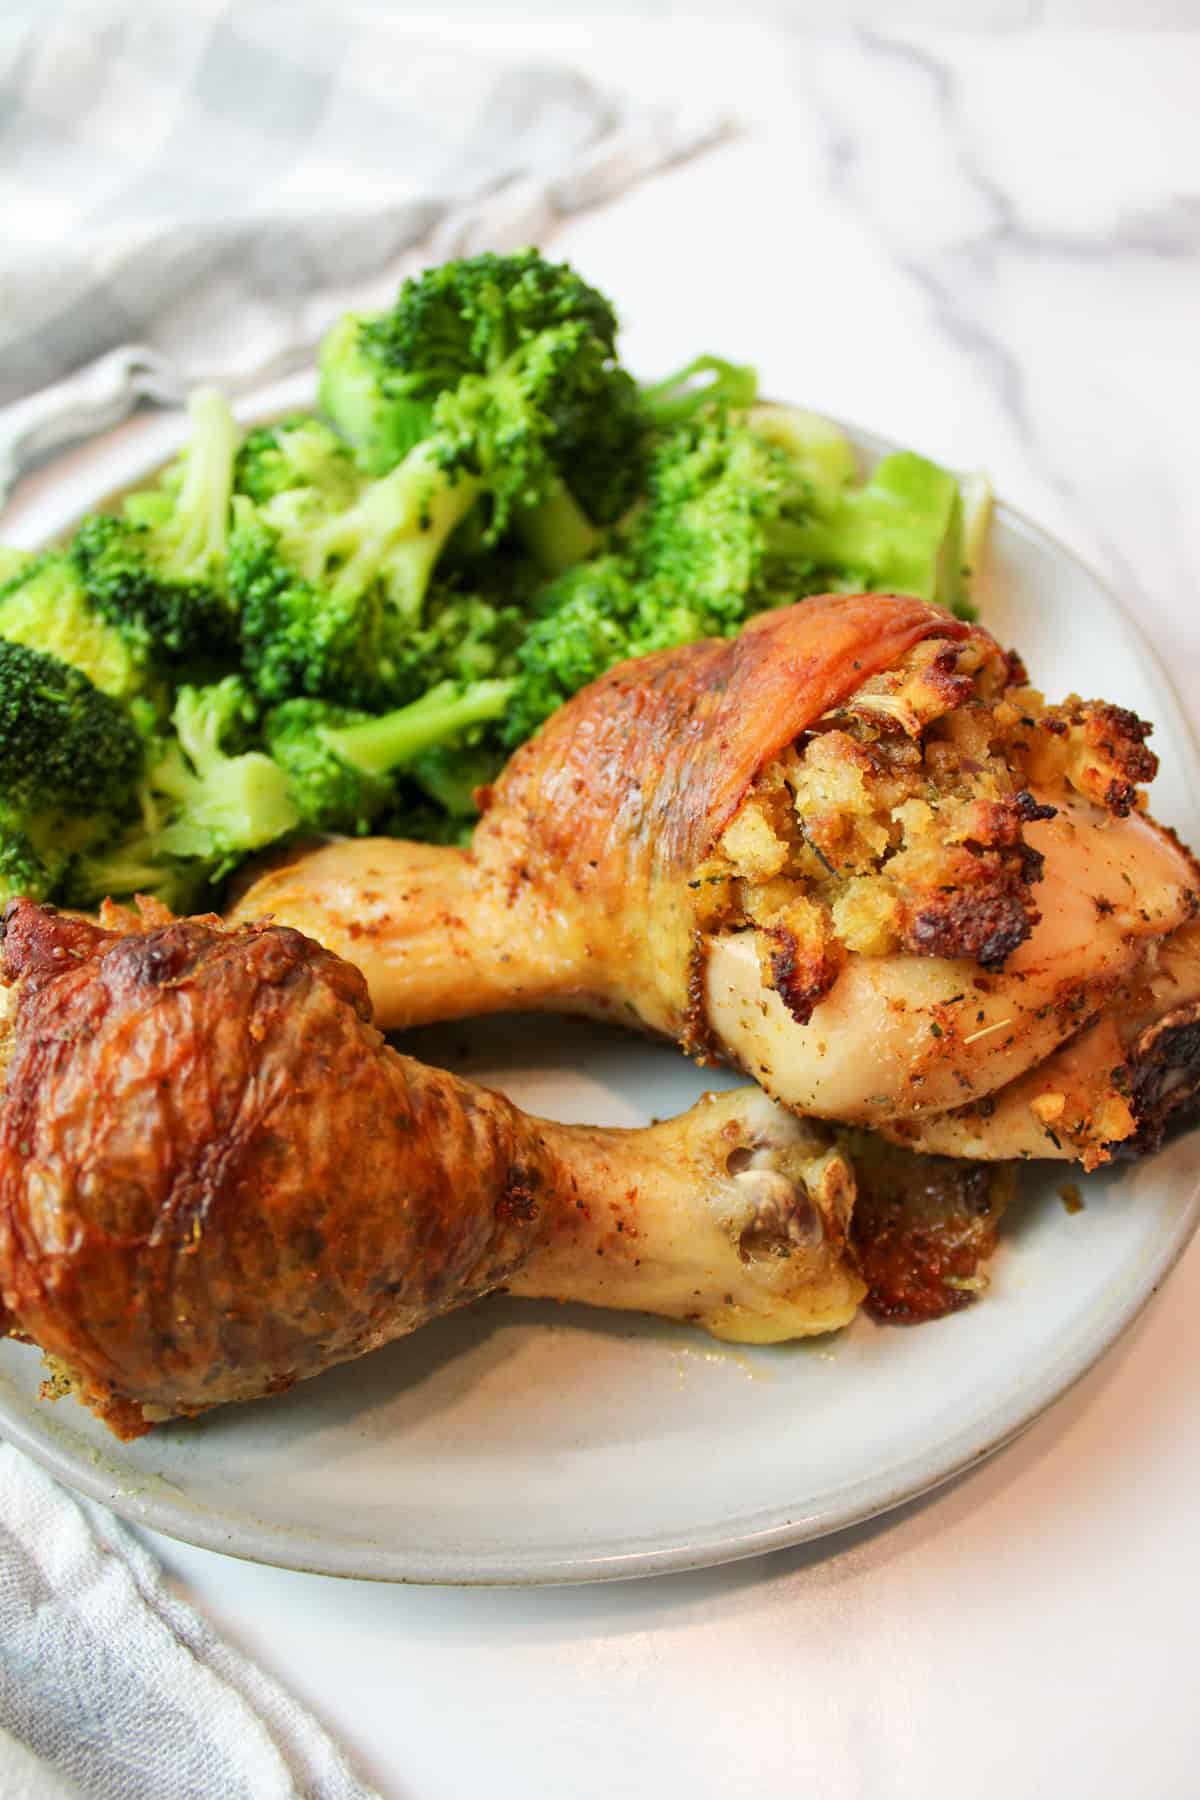 stuffed chicken legs on a plate with steamed broccoli.